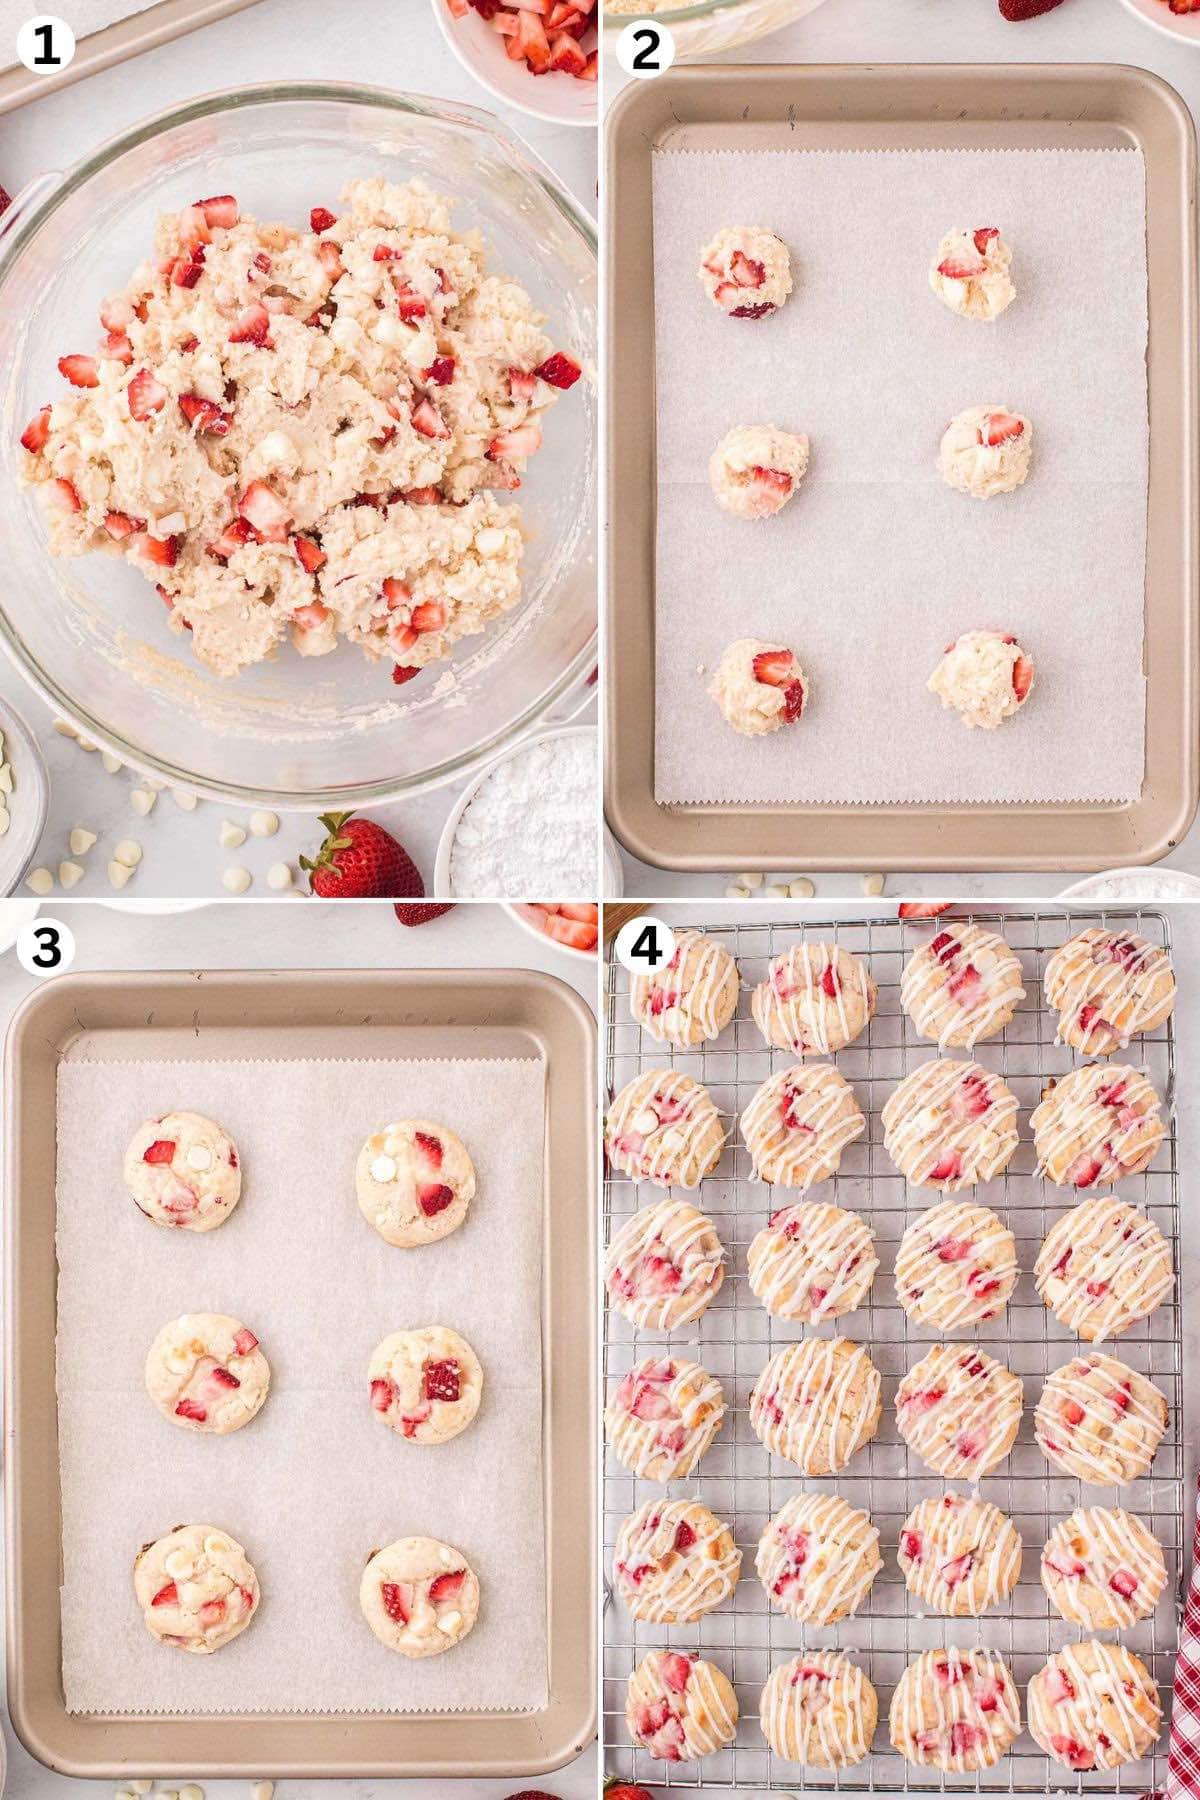 Mixed dough in a bowl. Scoop dough and place on top of baking tray. Baked cookies on baking tray. drizzle cookies with glaze on top of cooking rack.